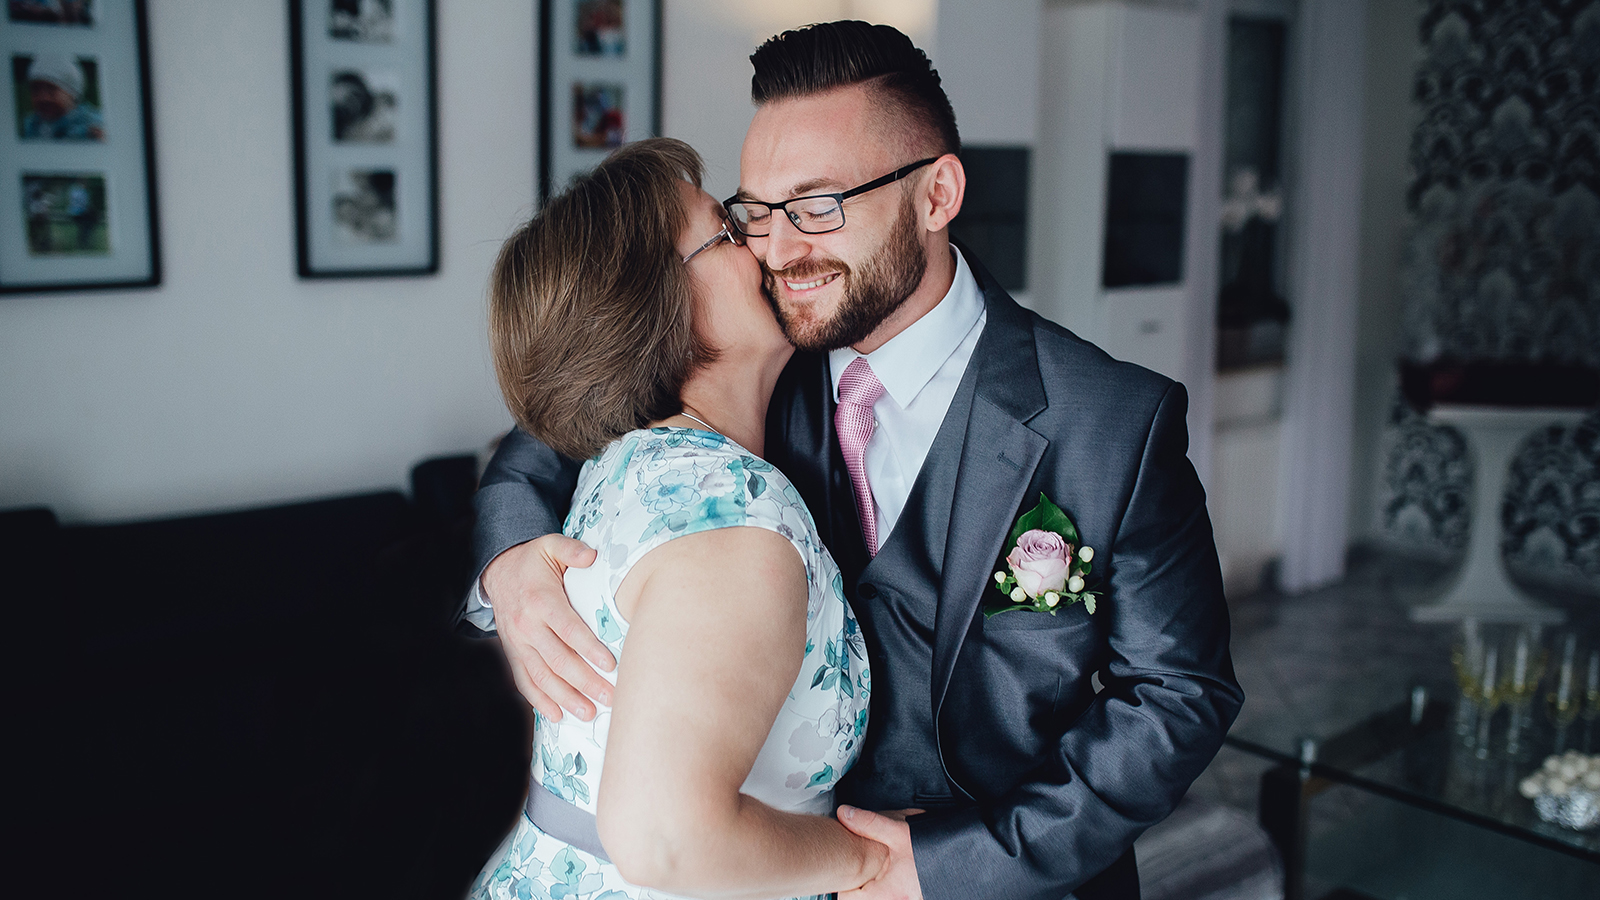 Portrait of a handsome groom in a grey suit with a tie with his mother. They are standing in the dining room, embracing each other and mother kissing her son and they are smiling.